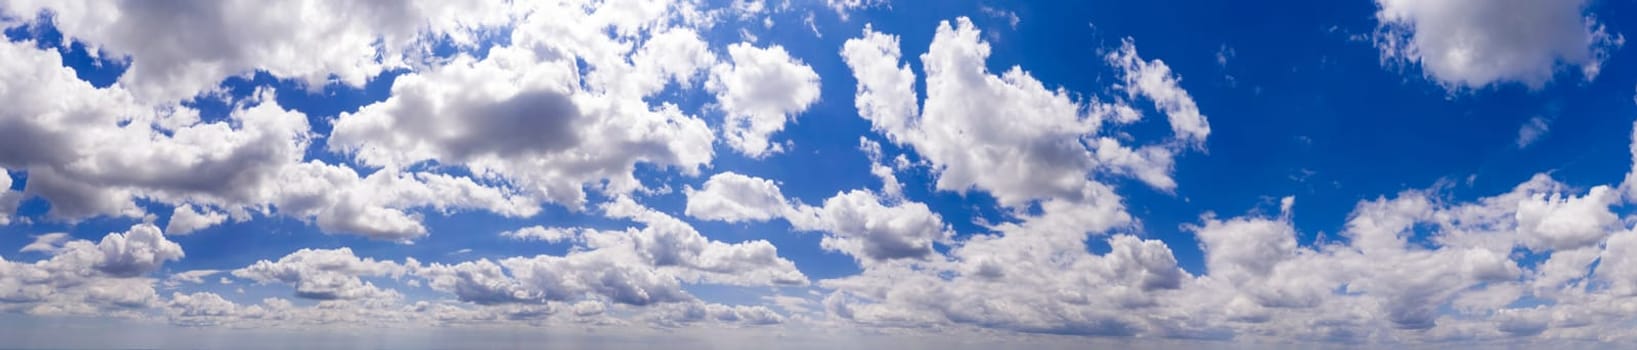 Panoramic view of blue sky with clouds and sunlight